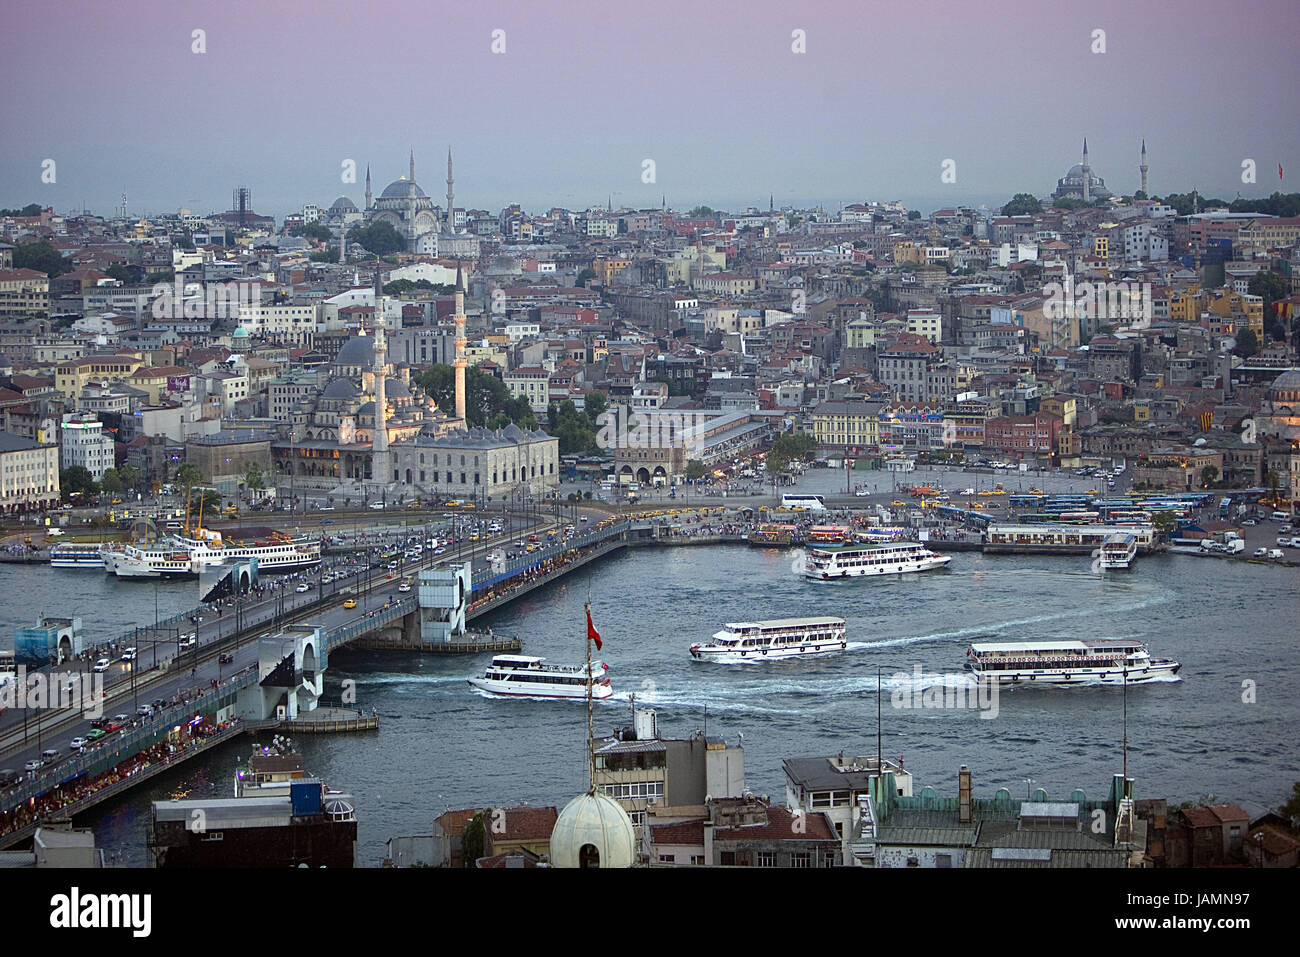 Turkey,Istanbul,town view,'the Golden Horn',Galata bridge,ships,dusk,town,city,metropolis,port,culture,place of interest,tourism,architecture,the Bosporus,sea,navigation,holiday ships,towers,minarets,mosque,domes,dusk,evening, Stock Photo